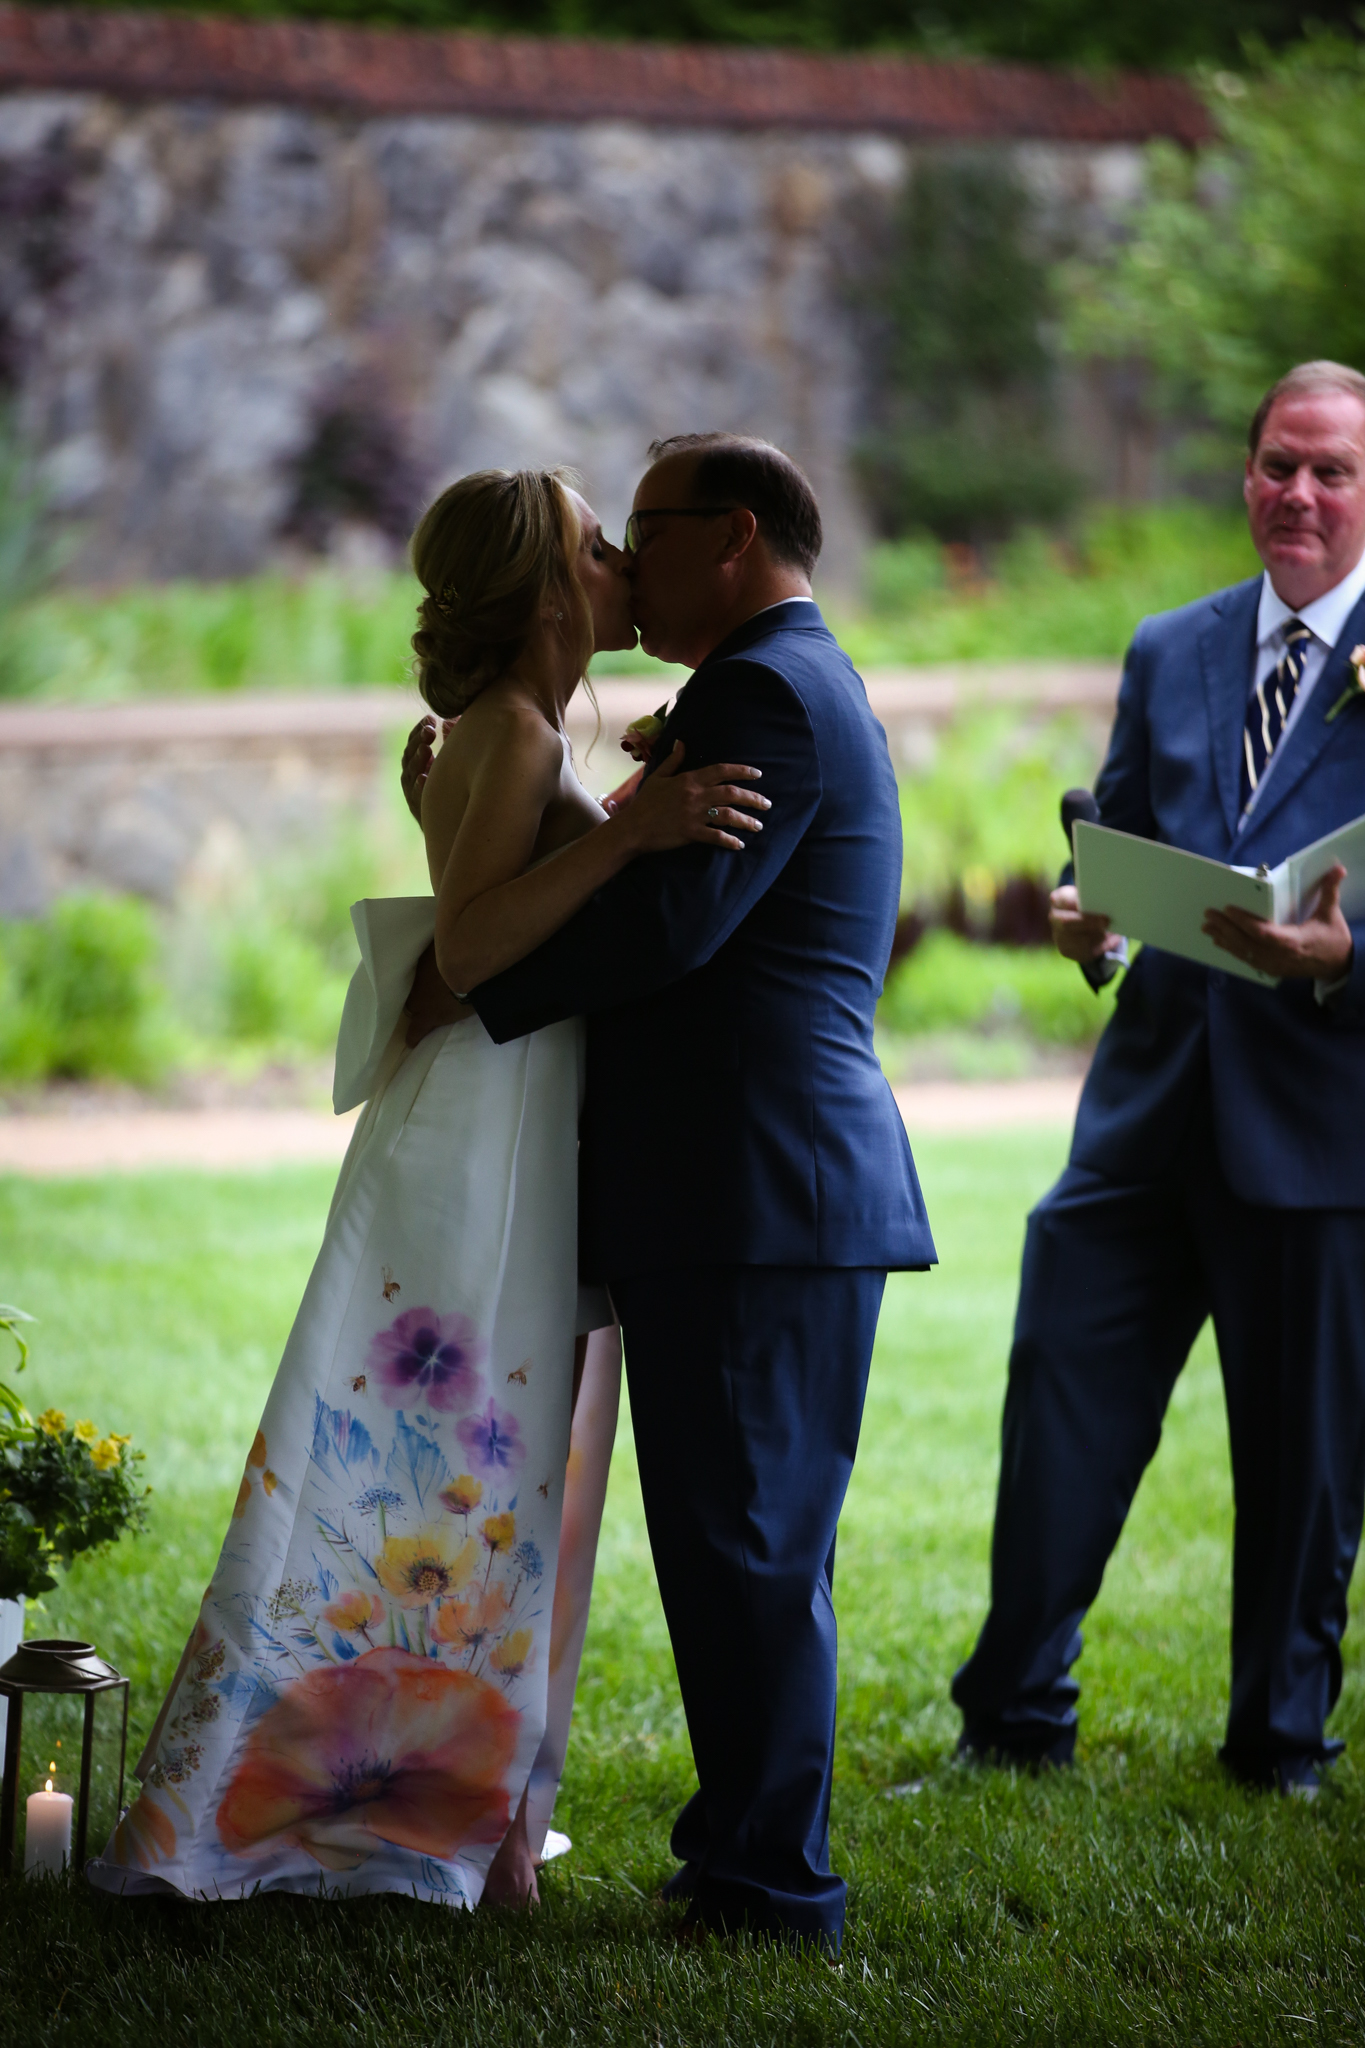 A bride and groom kiss for the first time at the Biltmore Wedding.